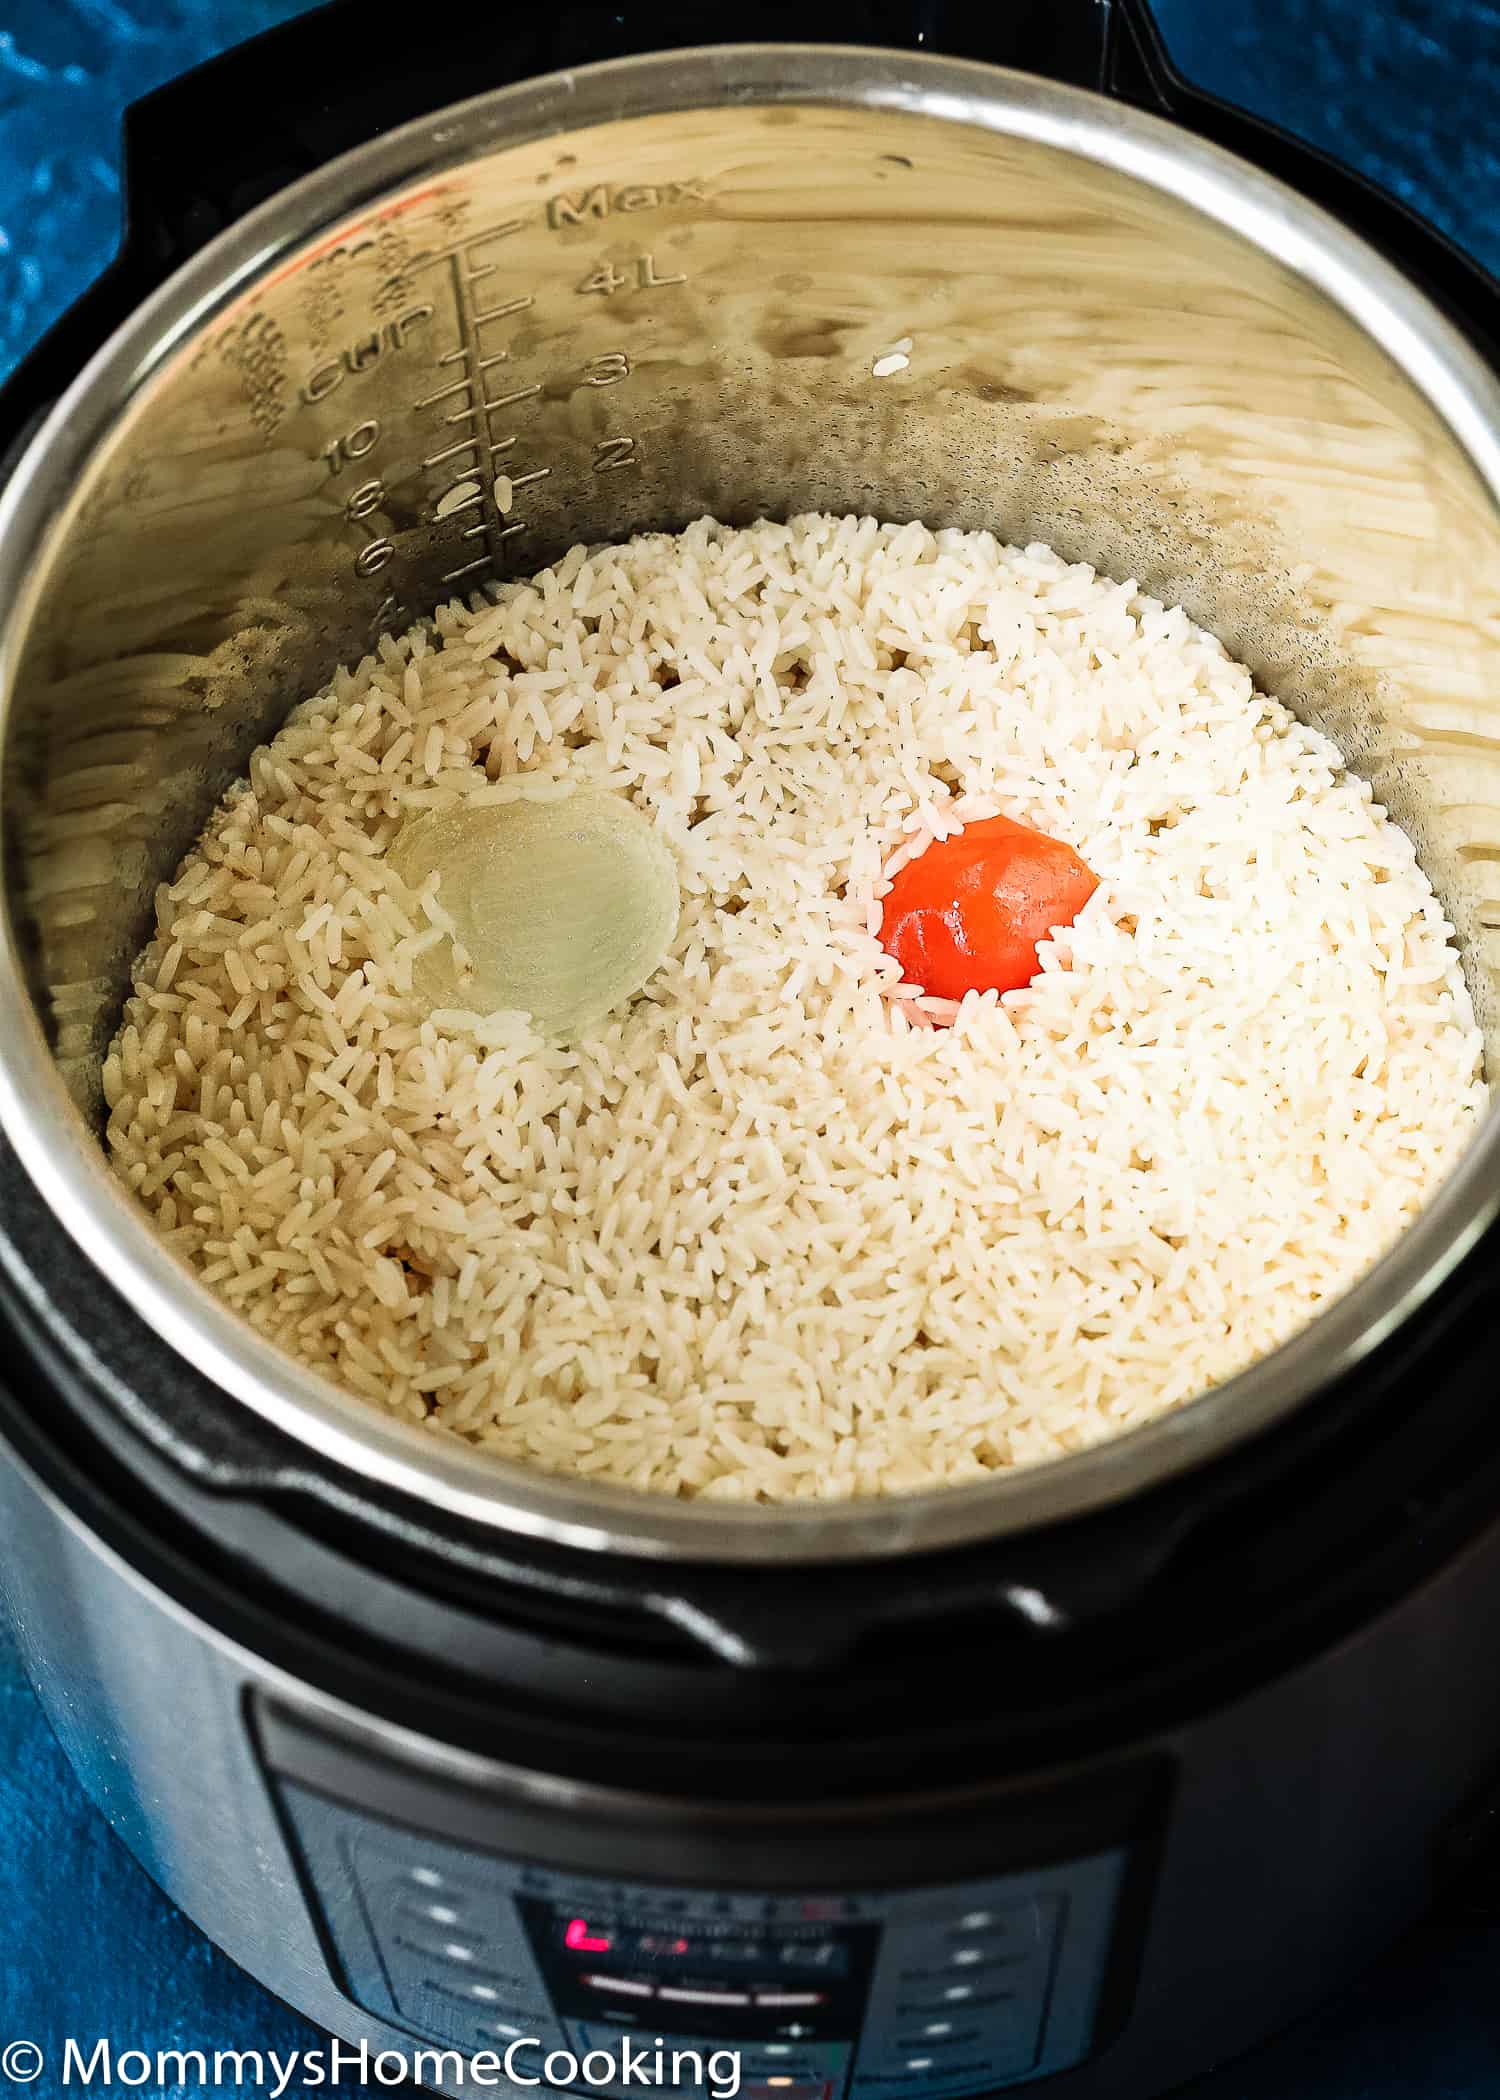 This Instant Pot Fluffy Rice is tender, light and flavorful every time! Keep reading to learn my fool-proof secret to cooking perfect rice in the Instant Pot. Ready in about 15 minutes. Guide to cook different kinds of rice in the Instant Pot is included.  https://mommyshomecooking.com